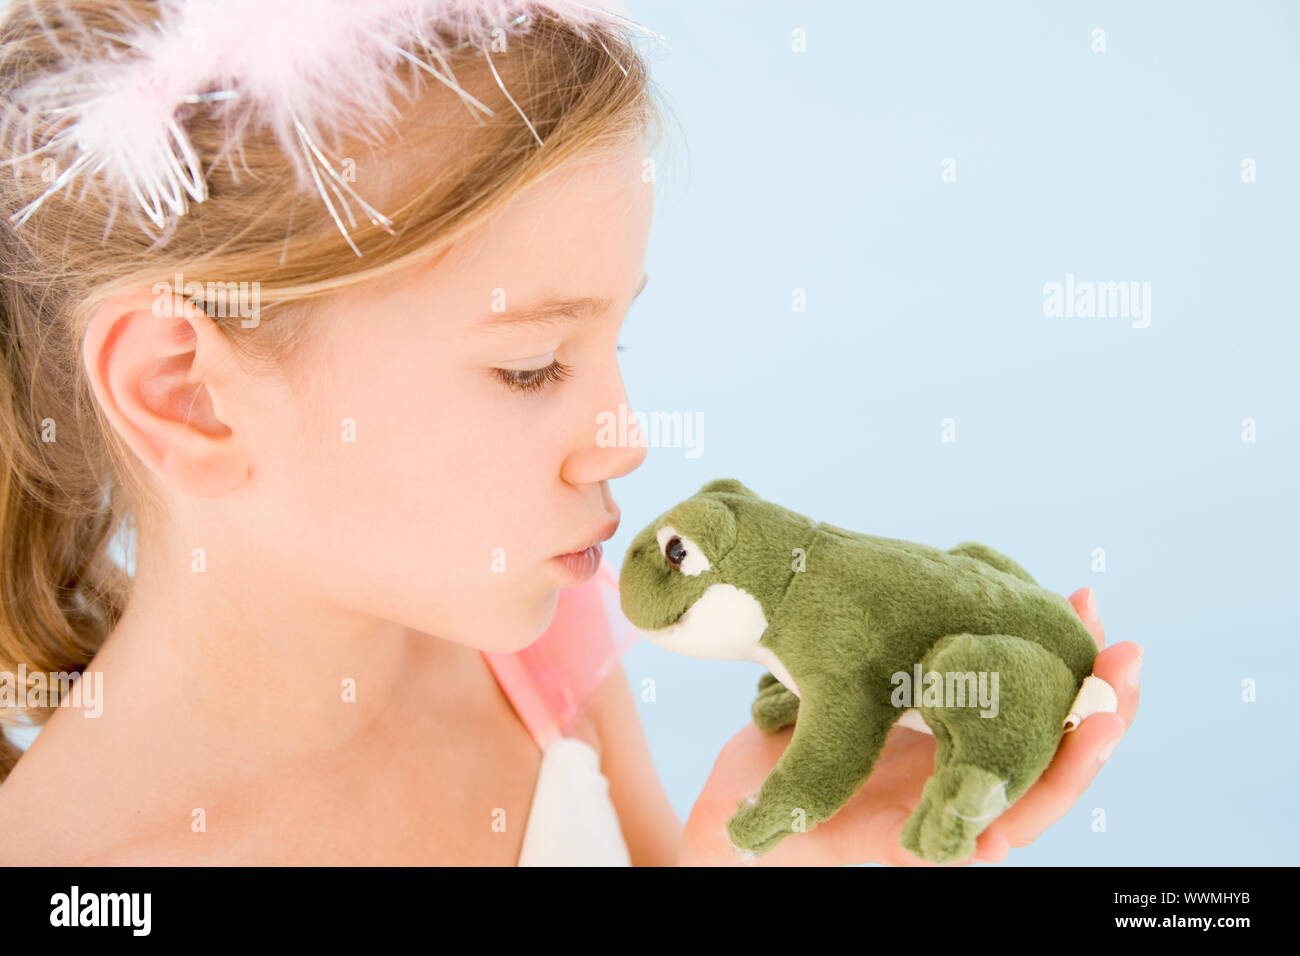 Young girl in princess costume kissing plush frog Stock Photo